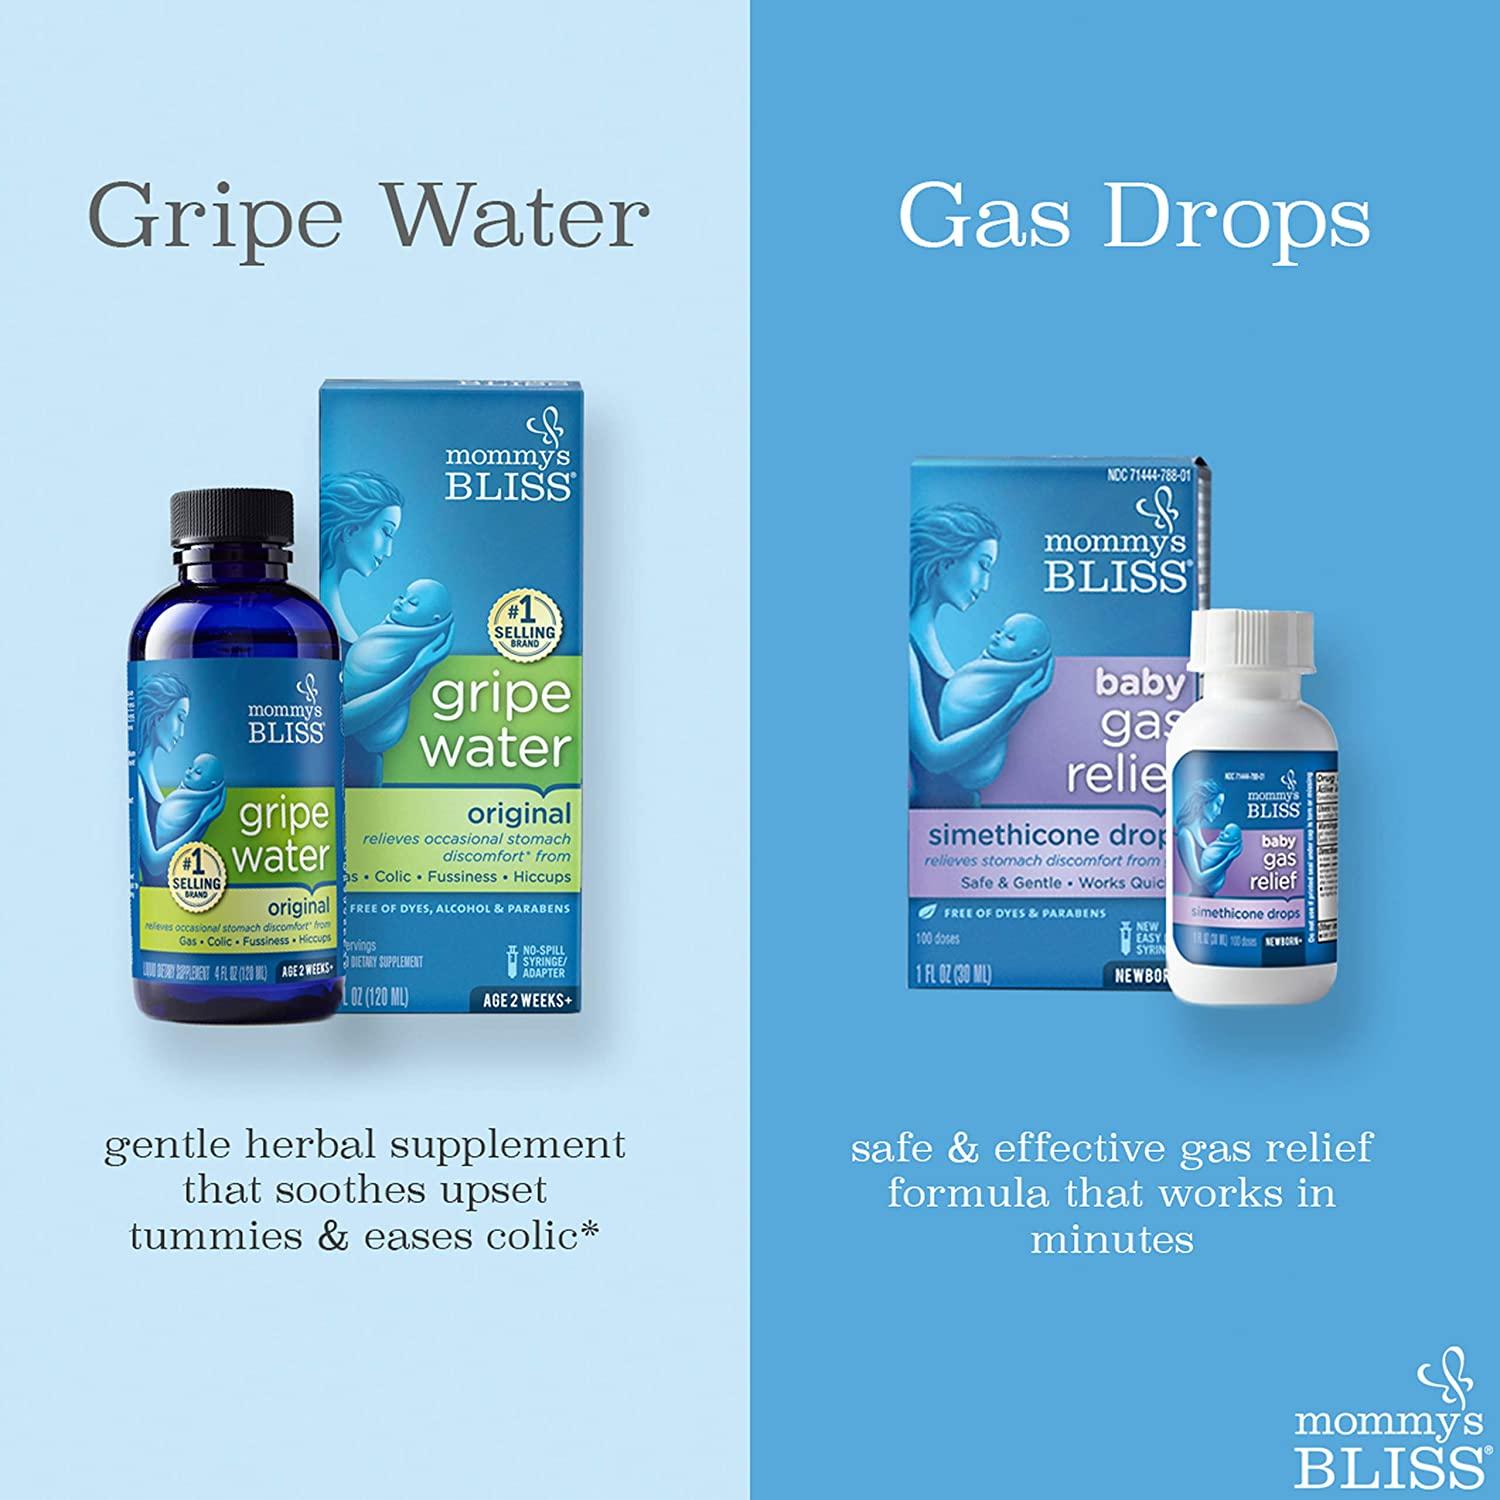 Gripe Water for Babies: What To Know